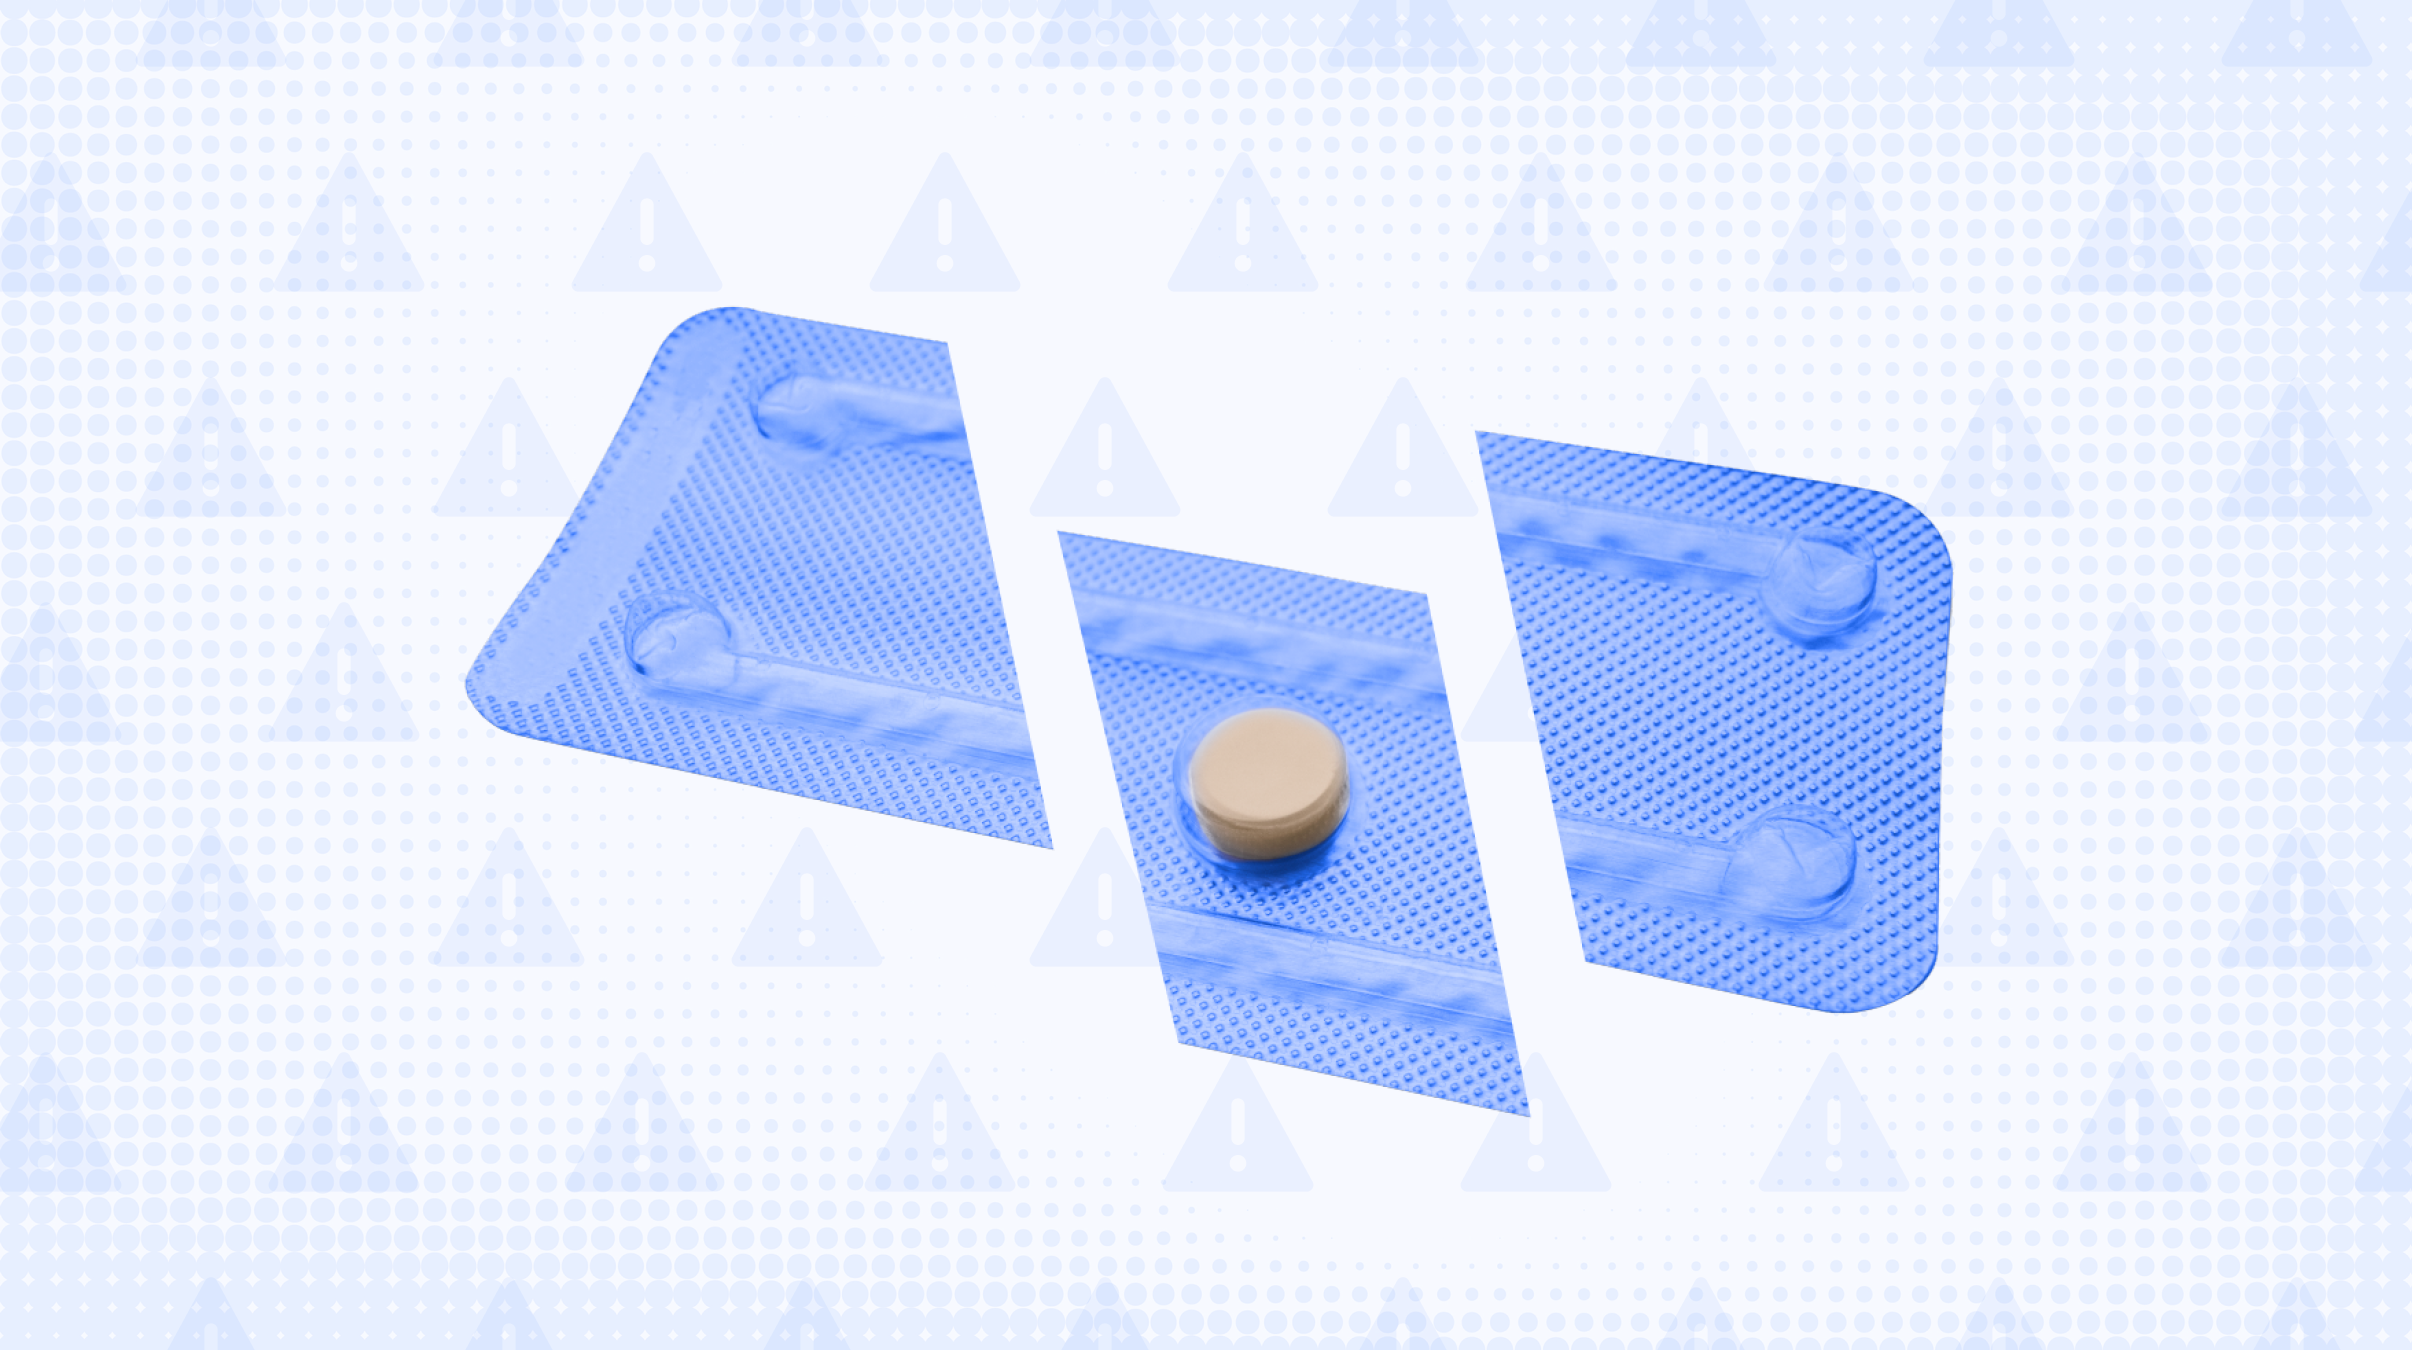 You Threw up Your Birth Control Pill: What Now?